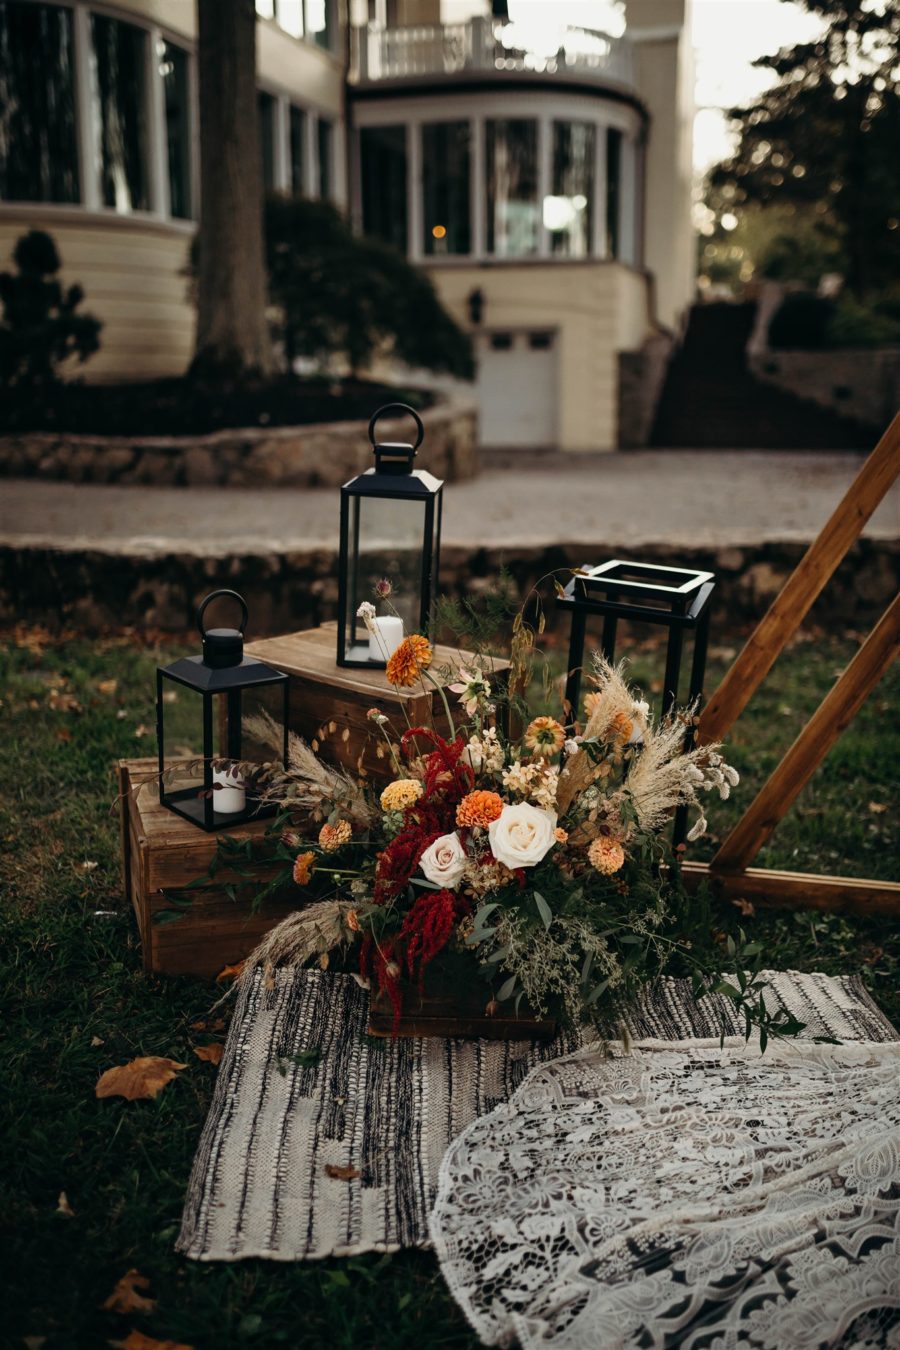 Winter Boho Wedding Decor for Styled Shoot featured on Nashville Bride Guide!